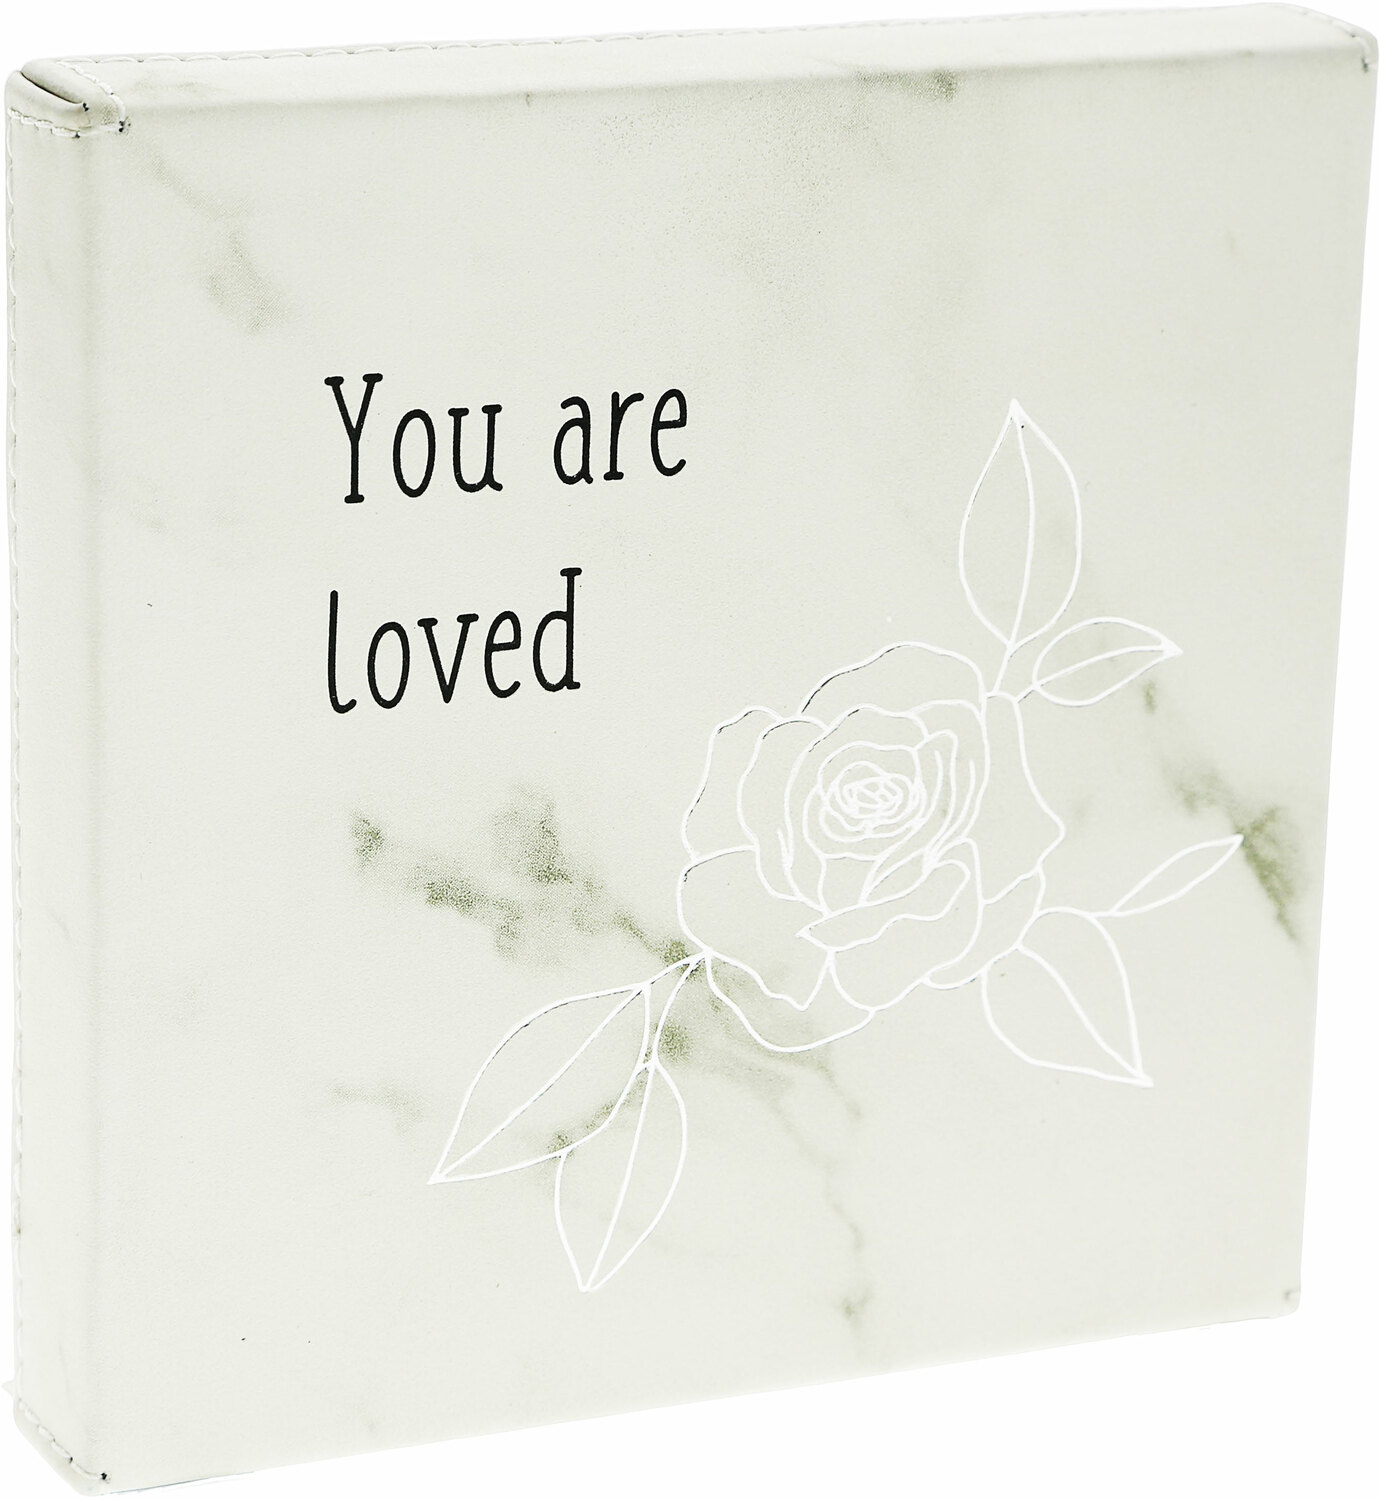 Loved by Faith Hope and Healing - Loved - 4.5" Faux Leather Plaque